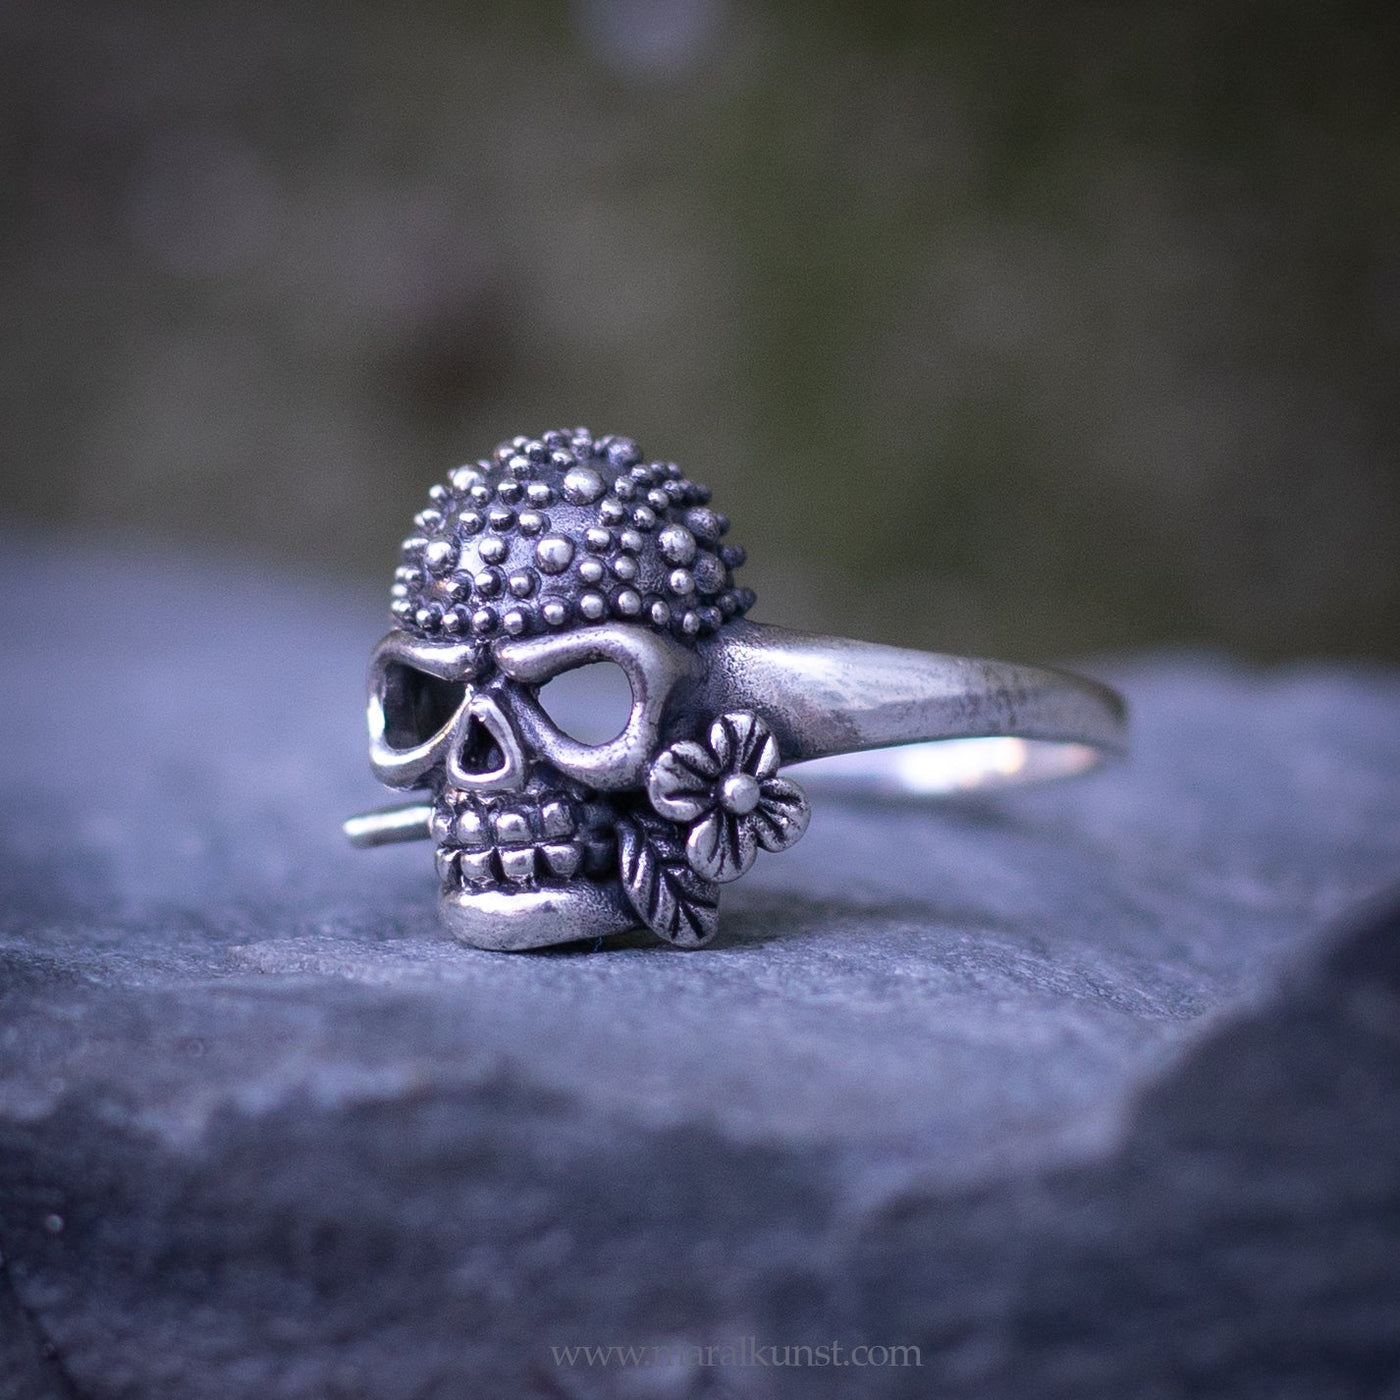 silver skull Mexican ring - Maral Kunst Jewelry